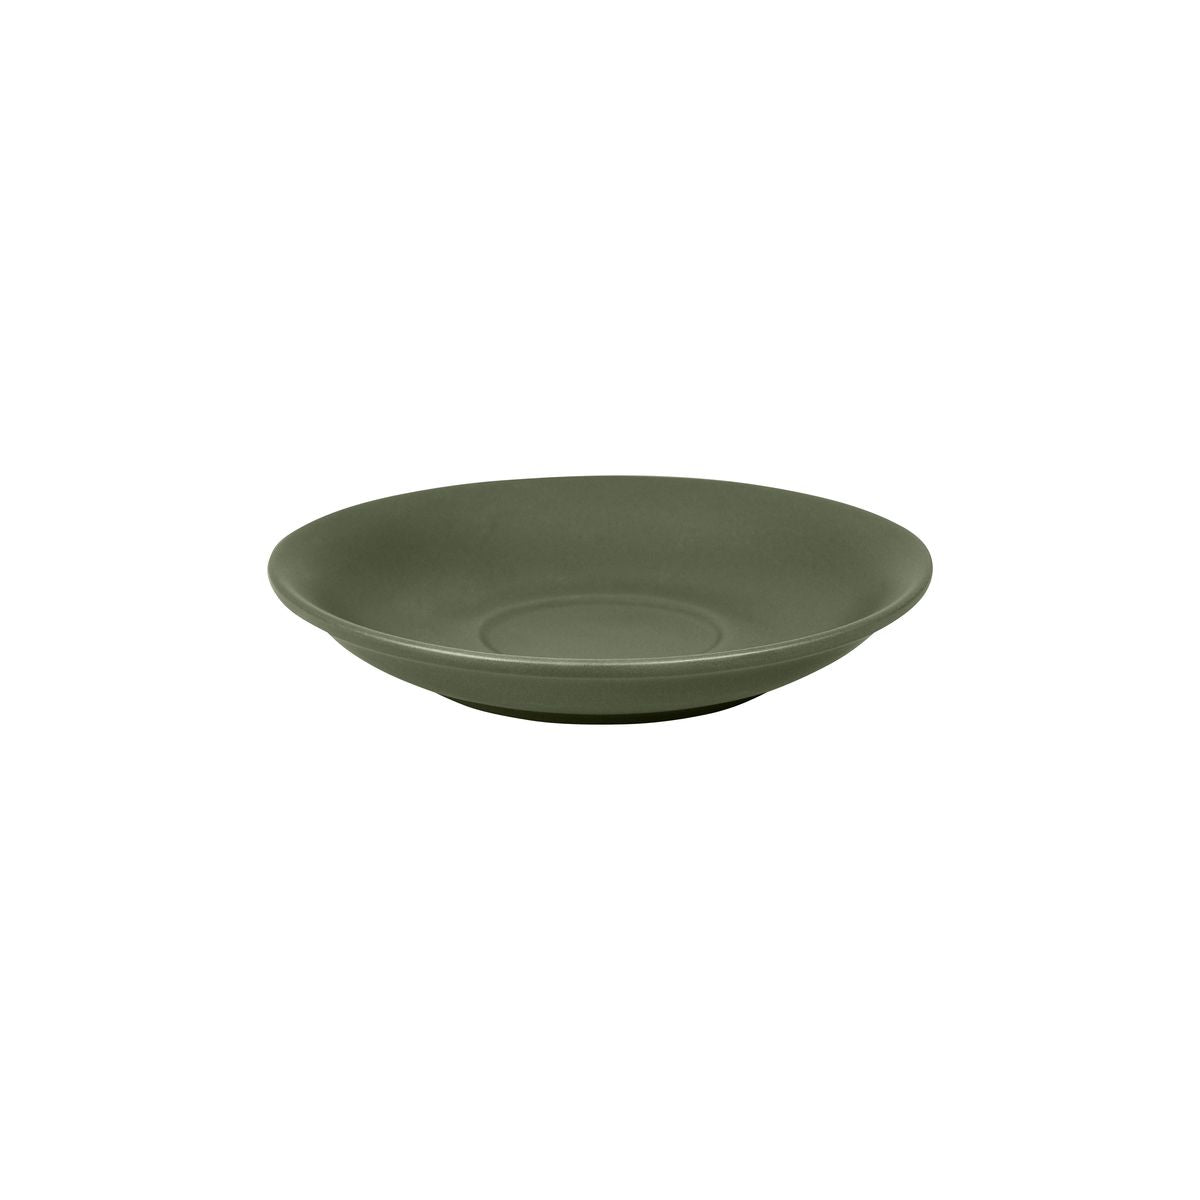 Saucer - Sage, 120mm from Bevande. made out of Porcelain and sold in boxes of 6. Hospitality quality at wholesale price with The Flying Fork! 